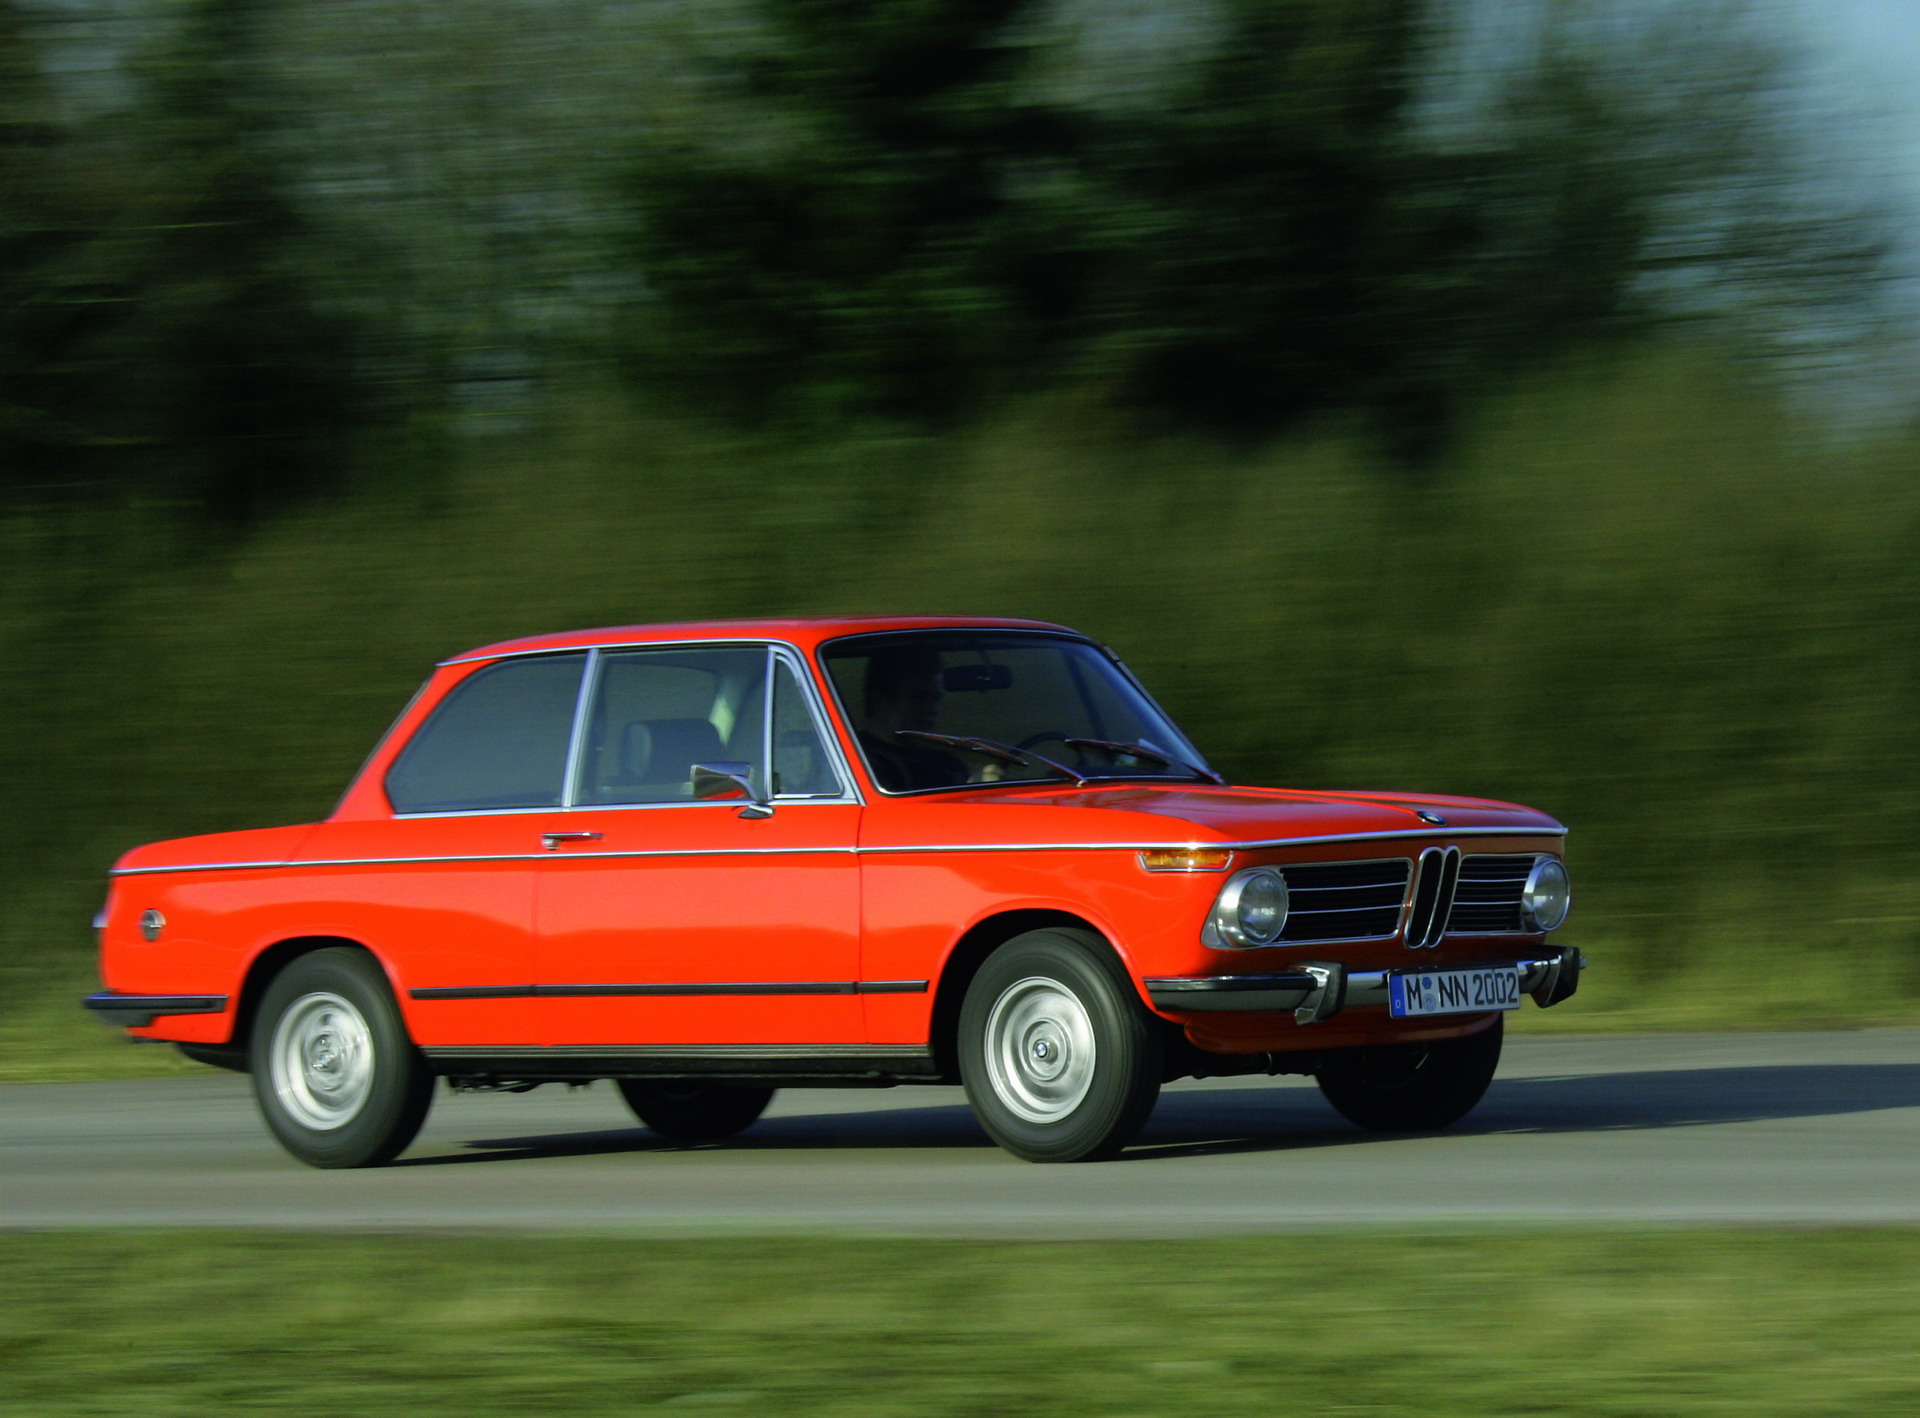 The BMW 2002 12